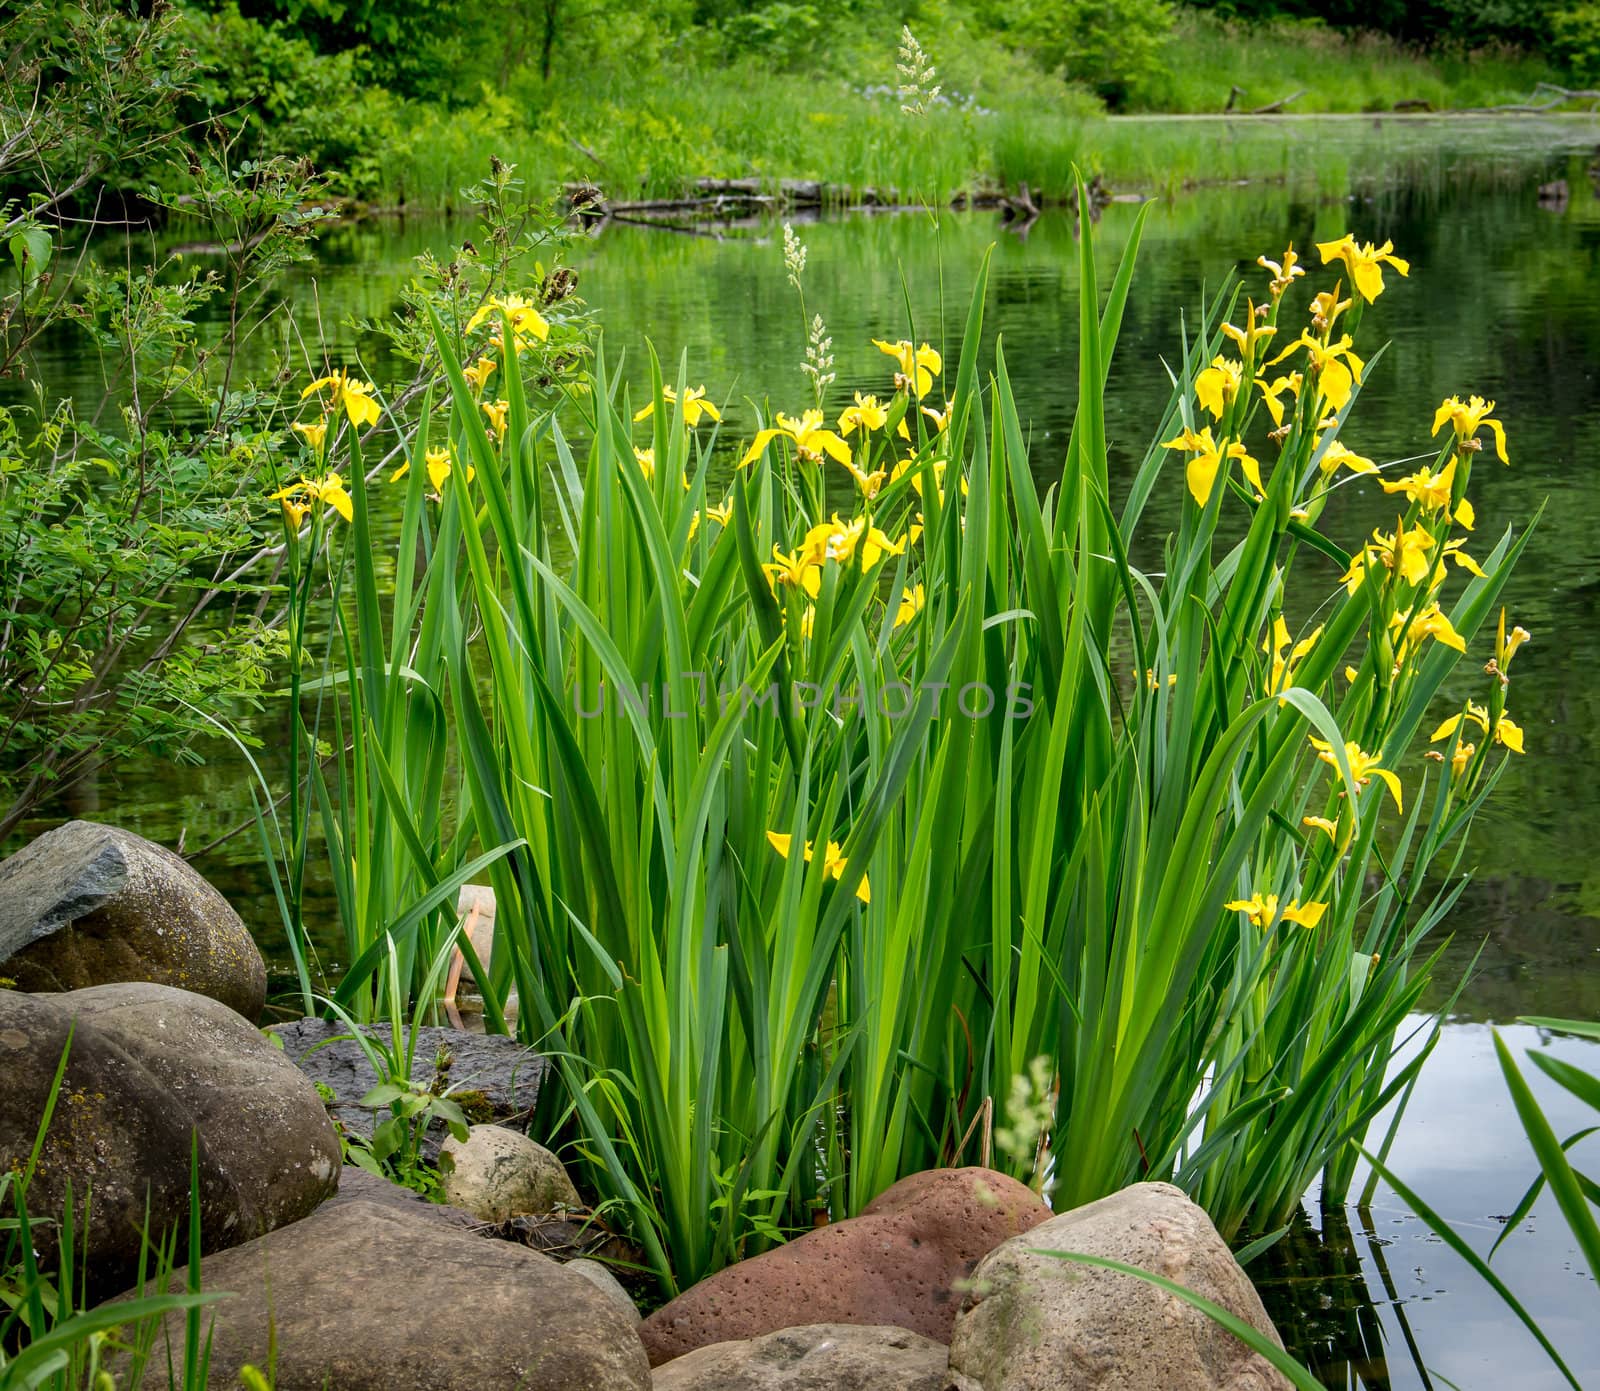 Yellow Wild Iris on the Shores of the Lake by wolterk